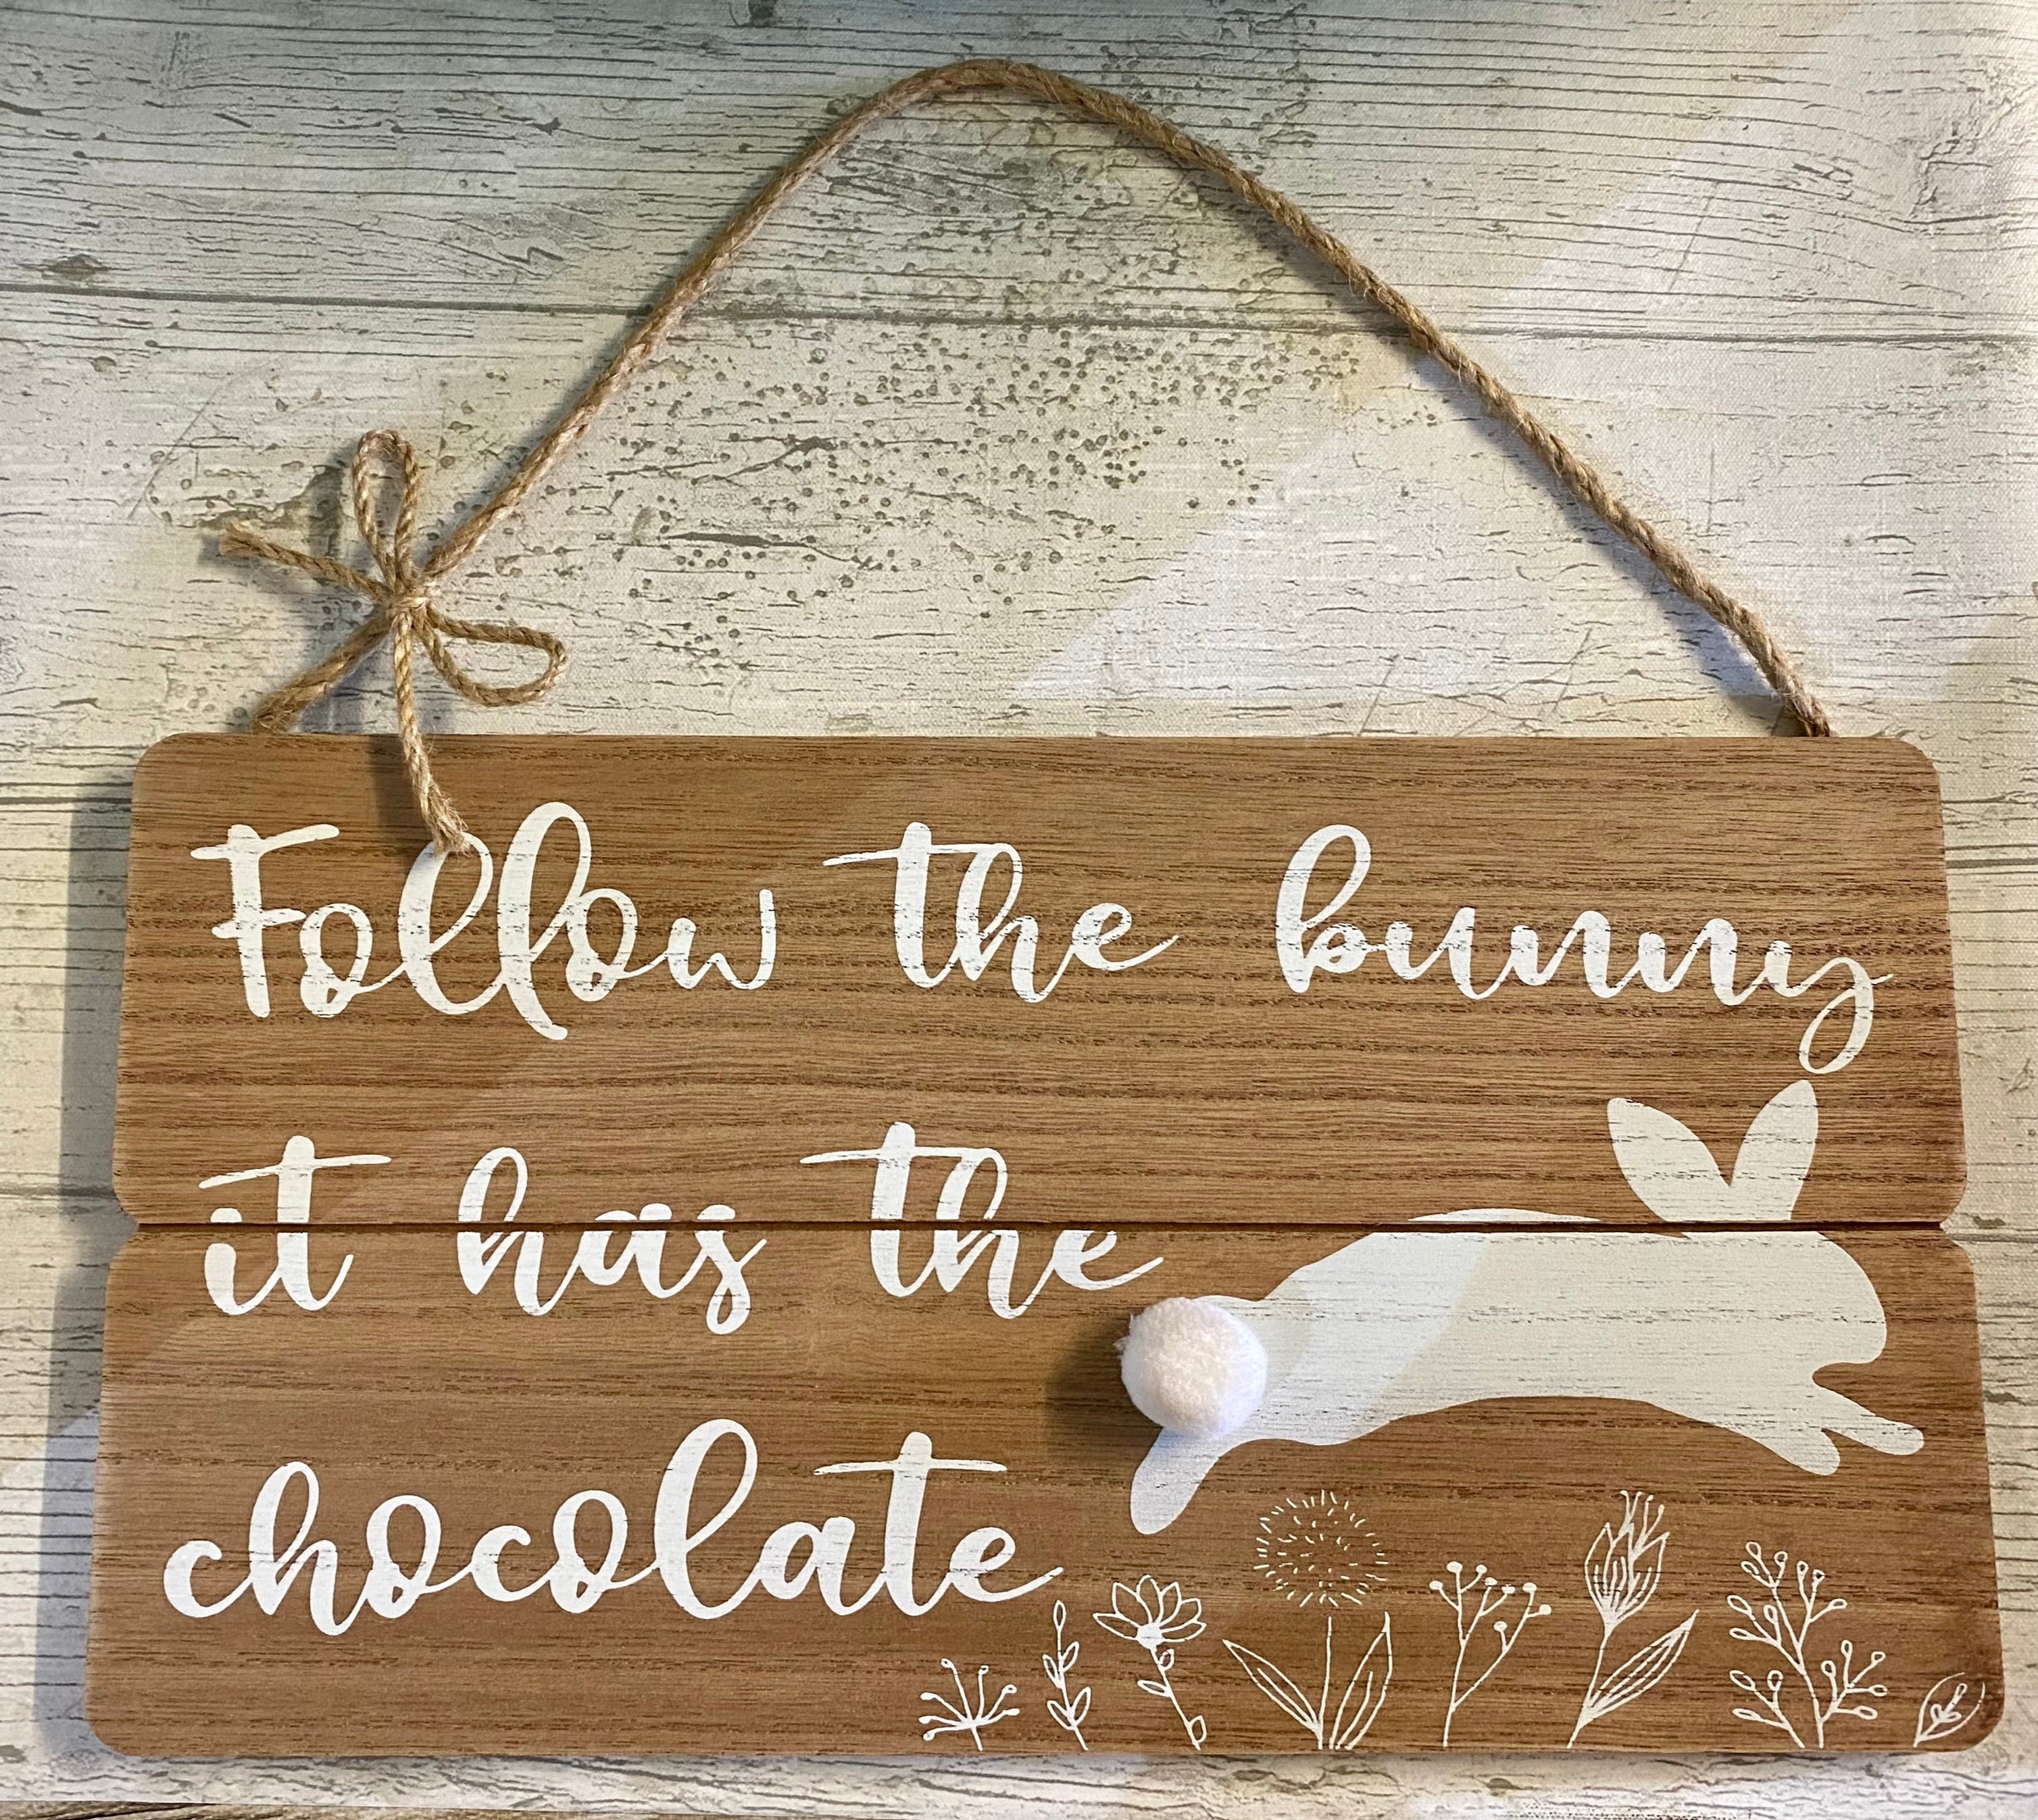 'Follow the Bunny it has the Chocolate' Wooden Decorative Hanging Easter Plaque - Kate's Cupboard